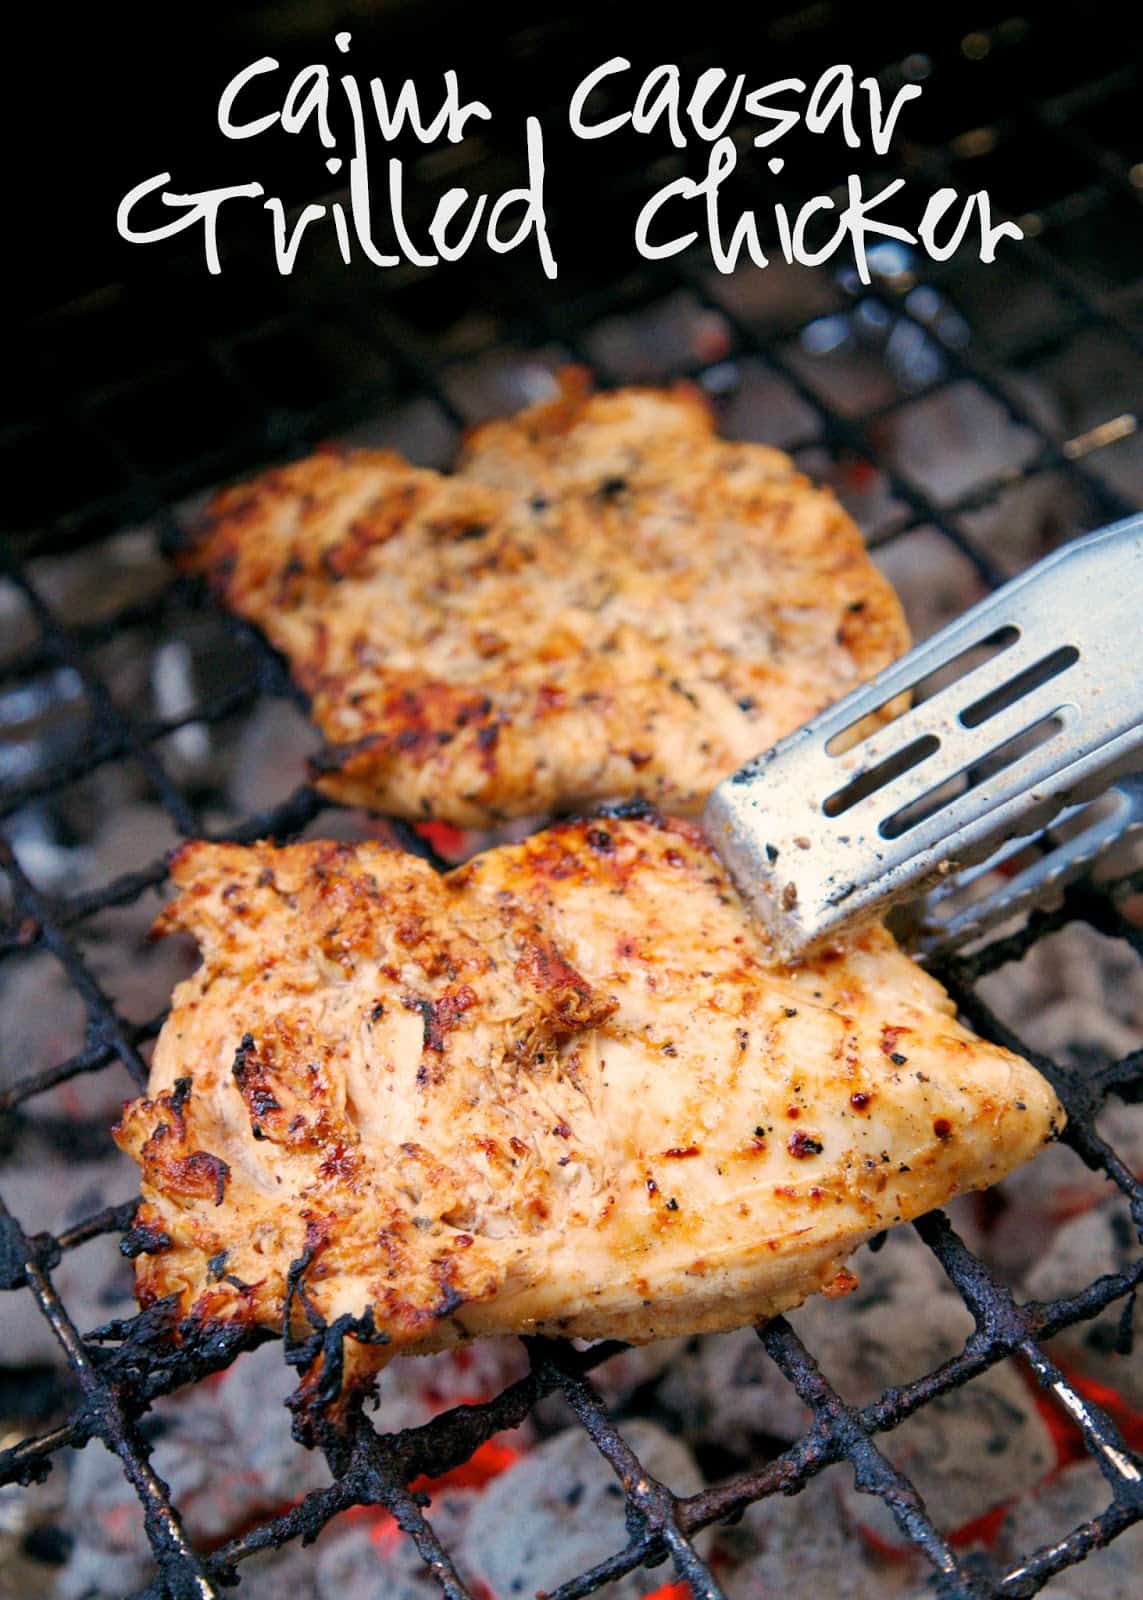 Cajun Caesar Grilled Chicken Recipe - 3 ingredient marinade! Caesar dressing, cajun seasoning and lemon juice. SO simple and super delicious! Whisk up marinade in the morning and let the chicken hang out in the fridge all day. Grill up for a quick and delicious dinner.